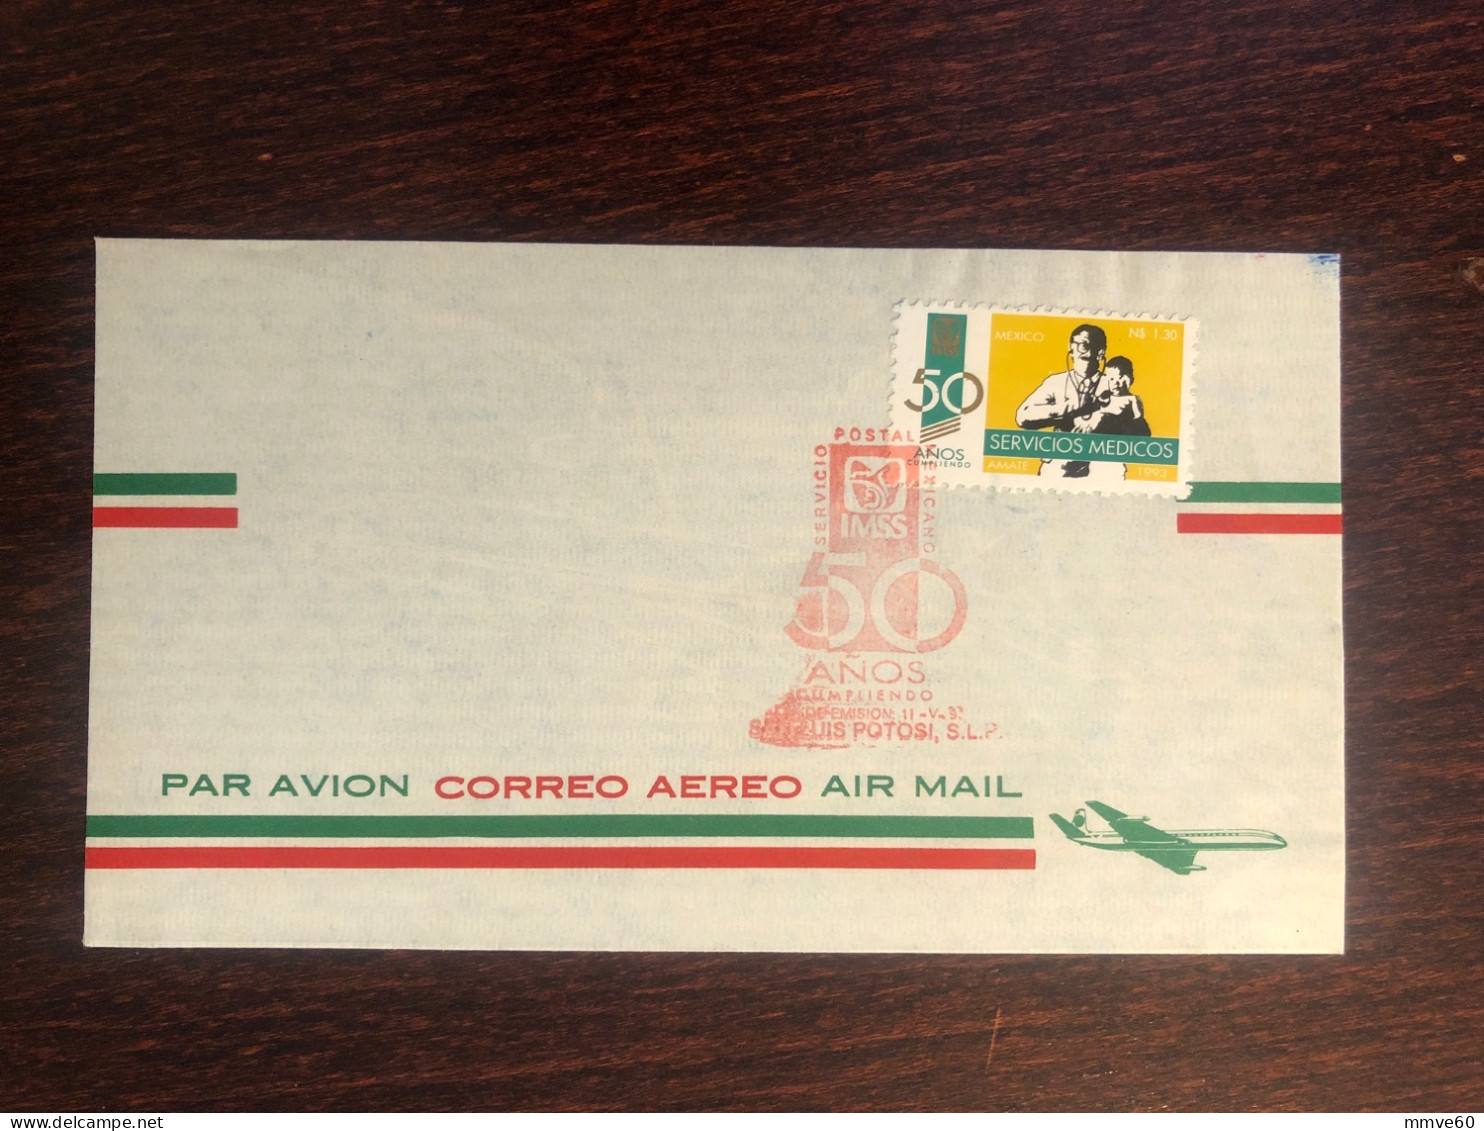 MEXICO FDC  COVER 1993 YEAR  MEDICAL SERVICES HEALTH MEDICINE STAMPS - Mexico